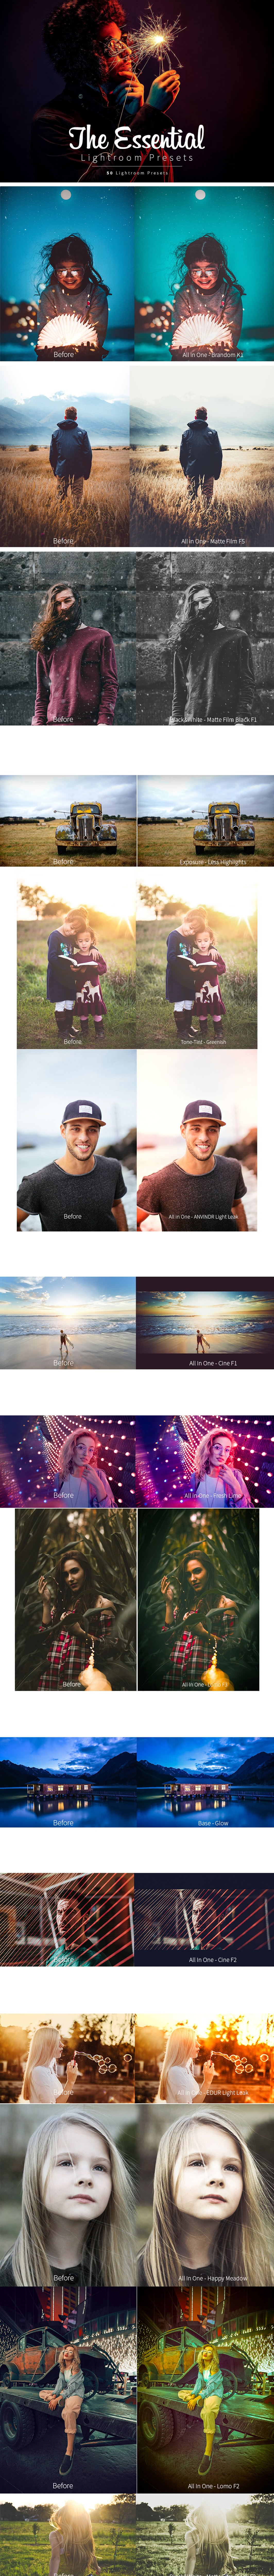 The Essential Lightroom Presets Packcover image.